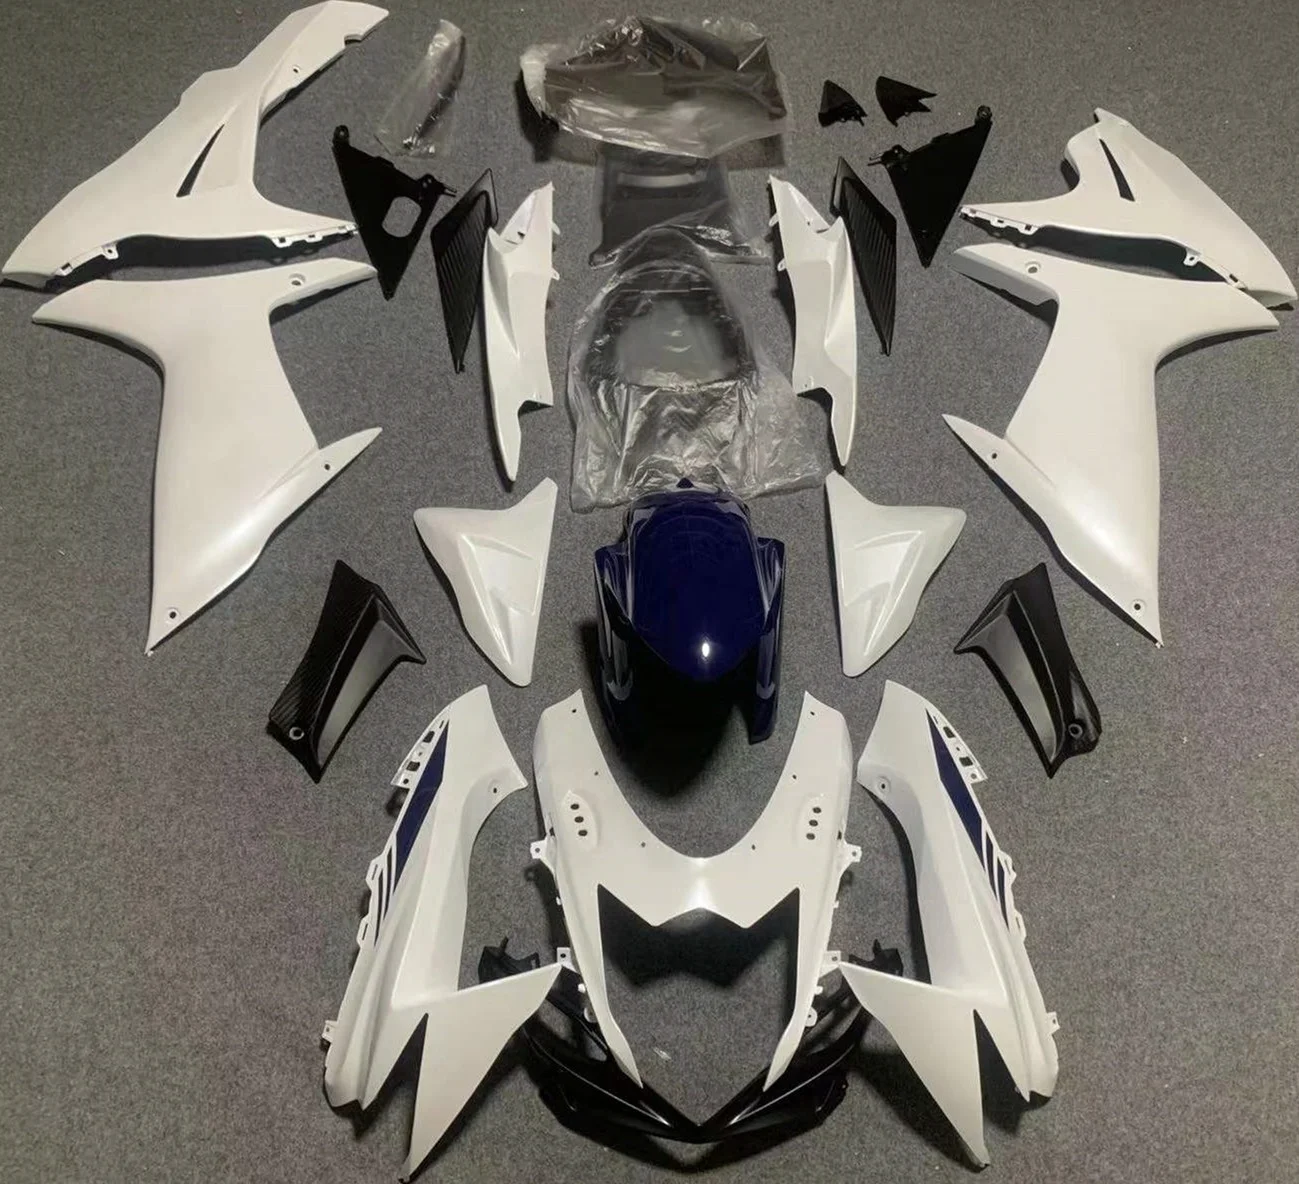 

2022 WHSC ABS Plastic Cowlings Kit For SUZUKI GSXR600-750 2011-2021 Motorcycle Accessories Blue White, Pictures shown